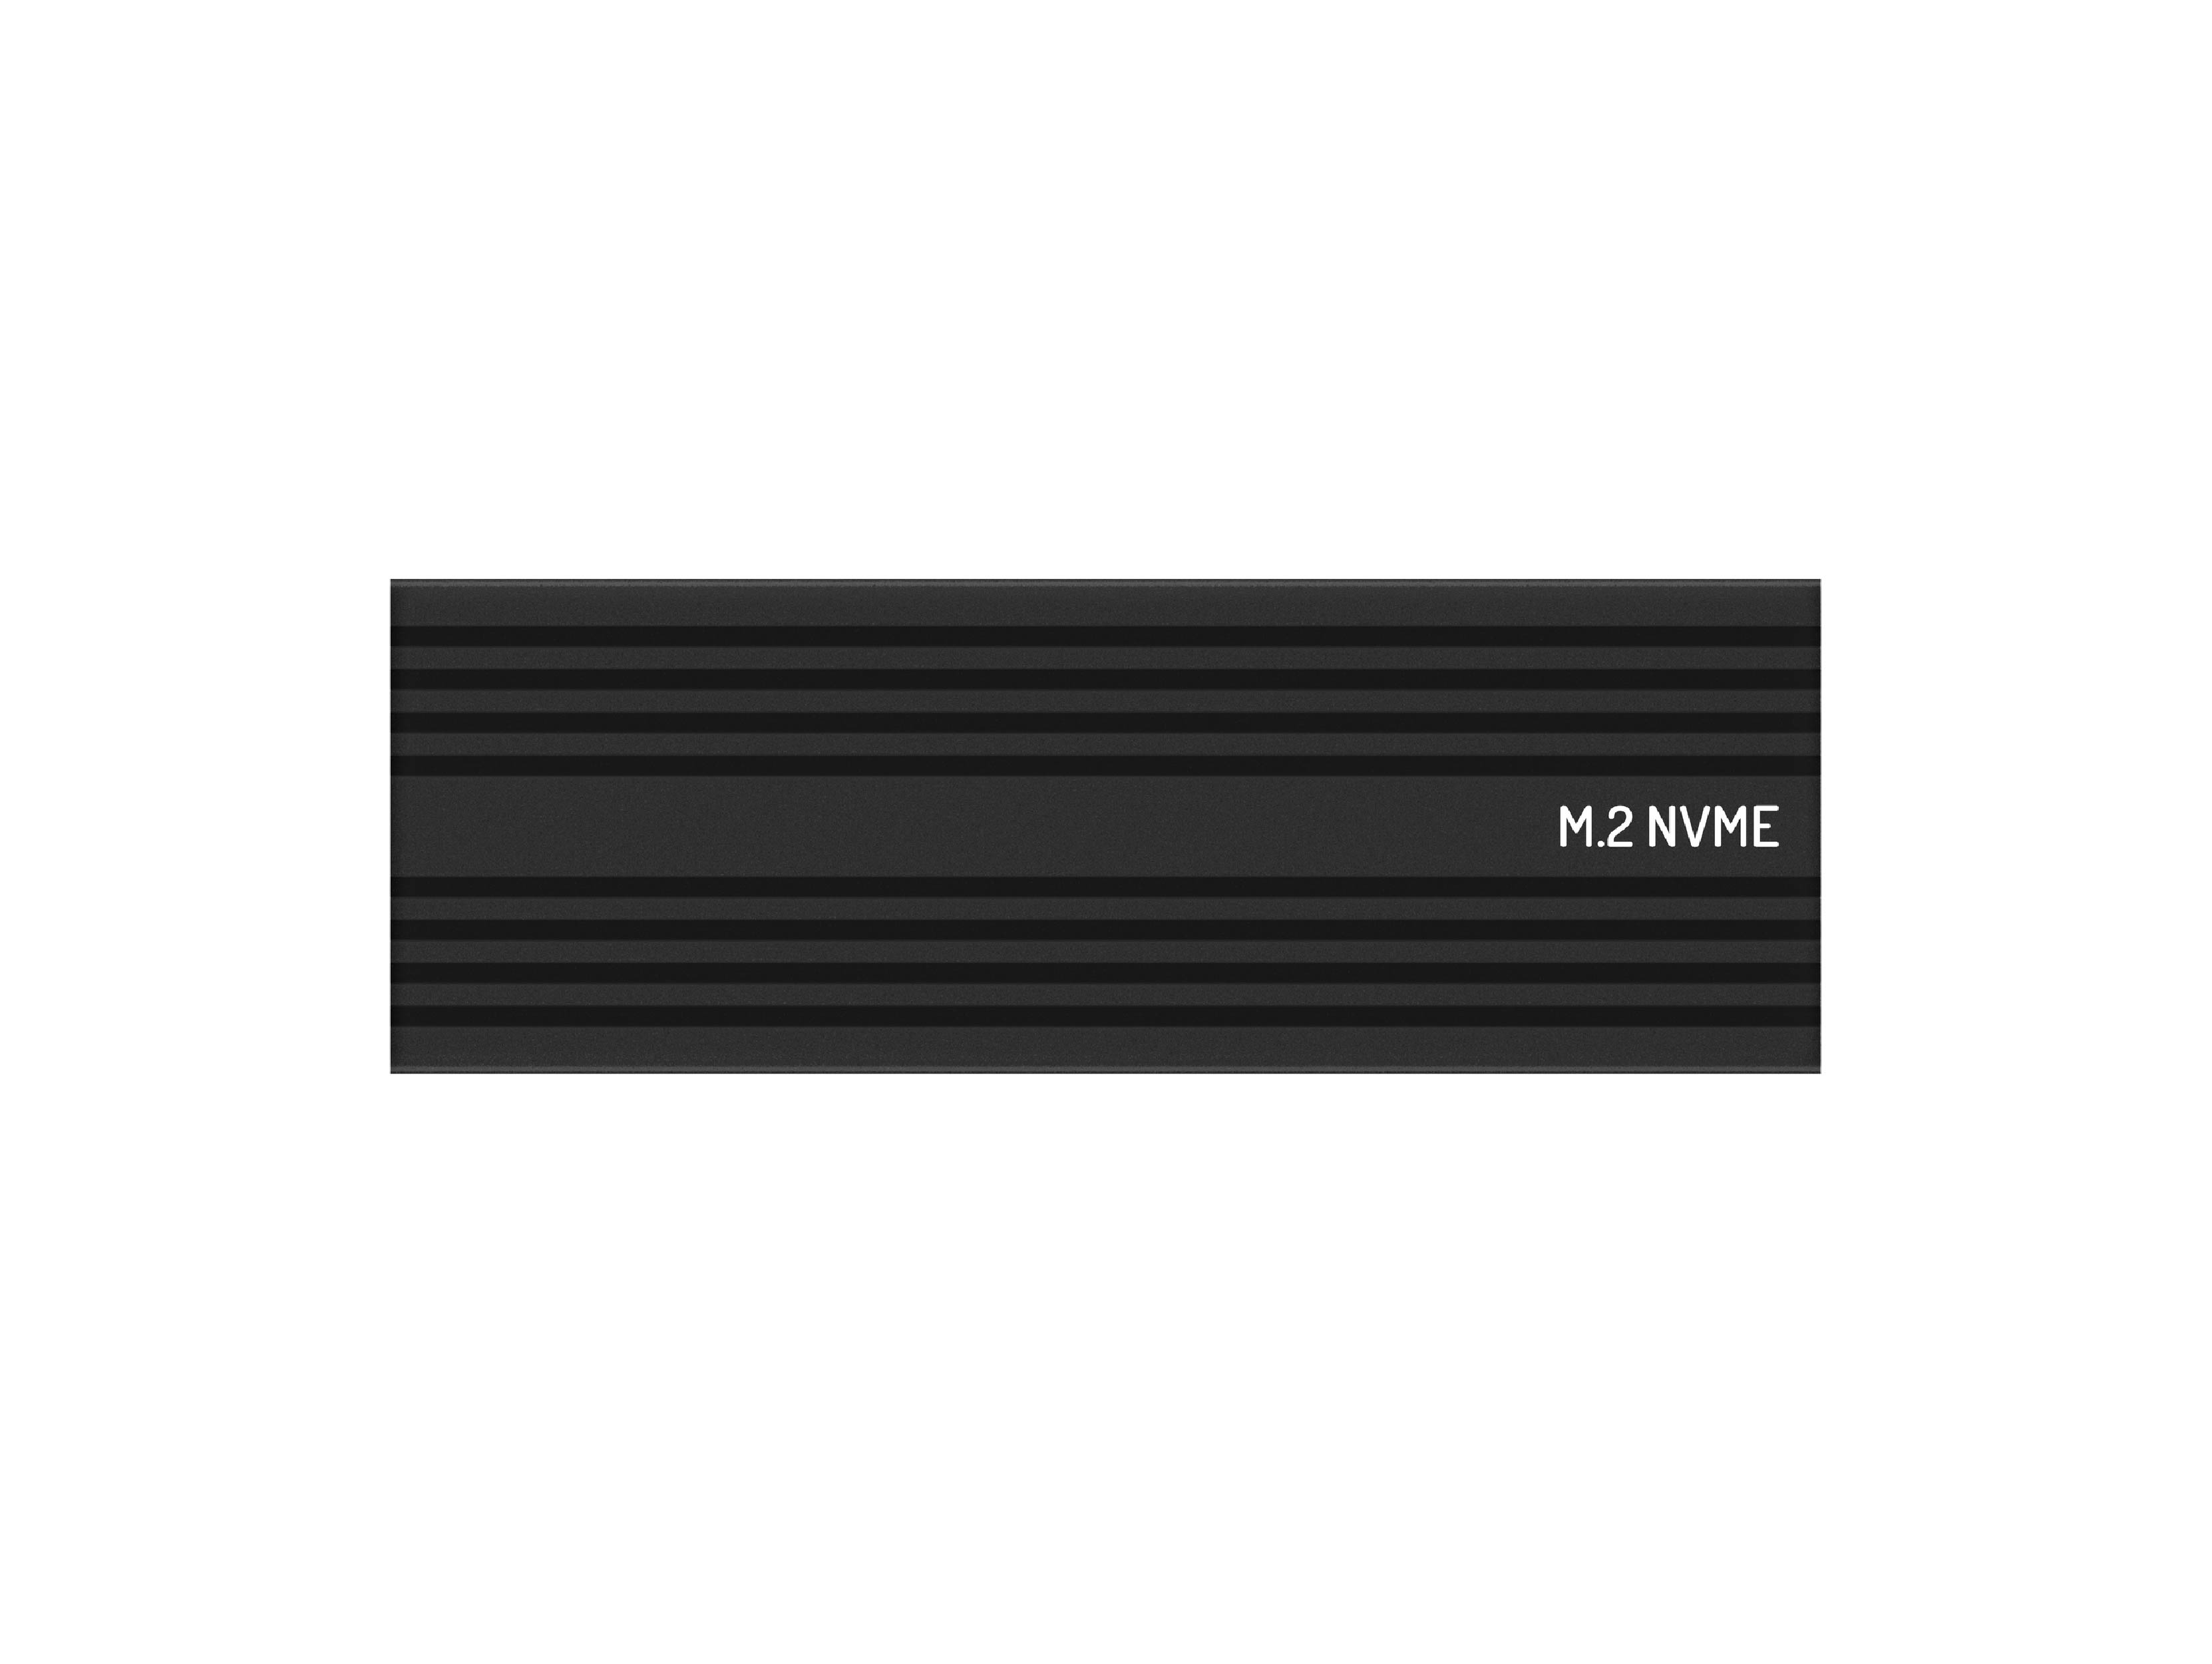 M.2 NVMe SSD Enclosure, Finned Design (SI-8513US31C-NVMe), compatible with 1x M.2 NVMe PCIe SSD, USB3.2-C 10Gbps to host.